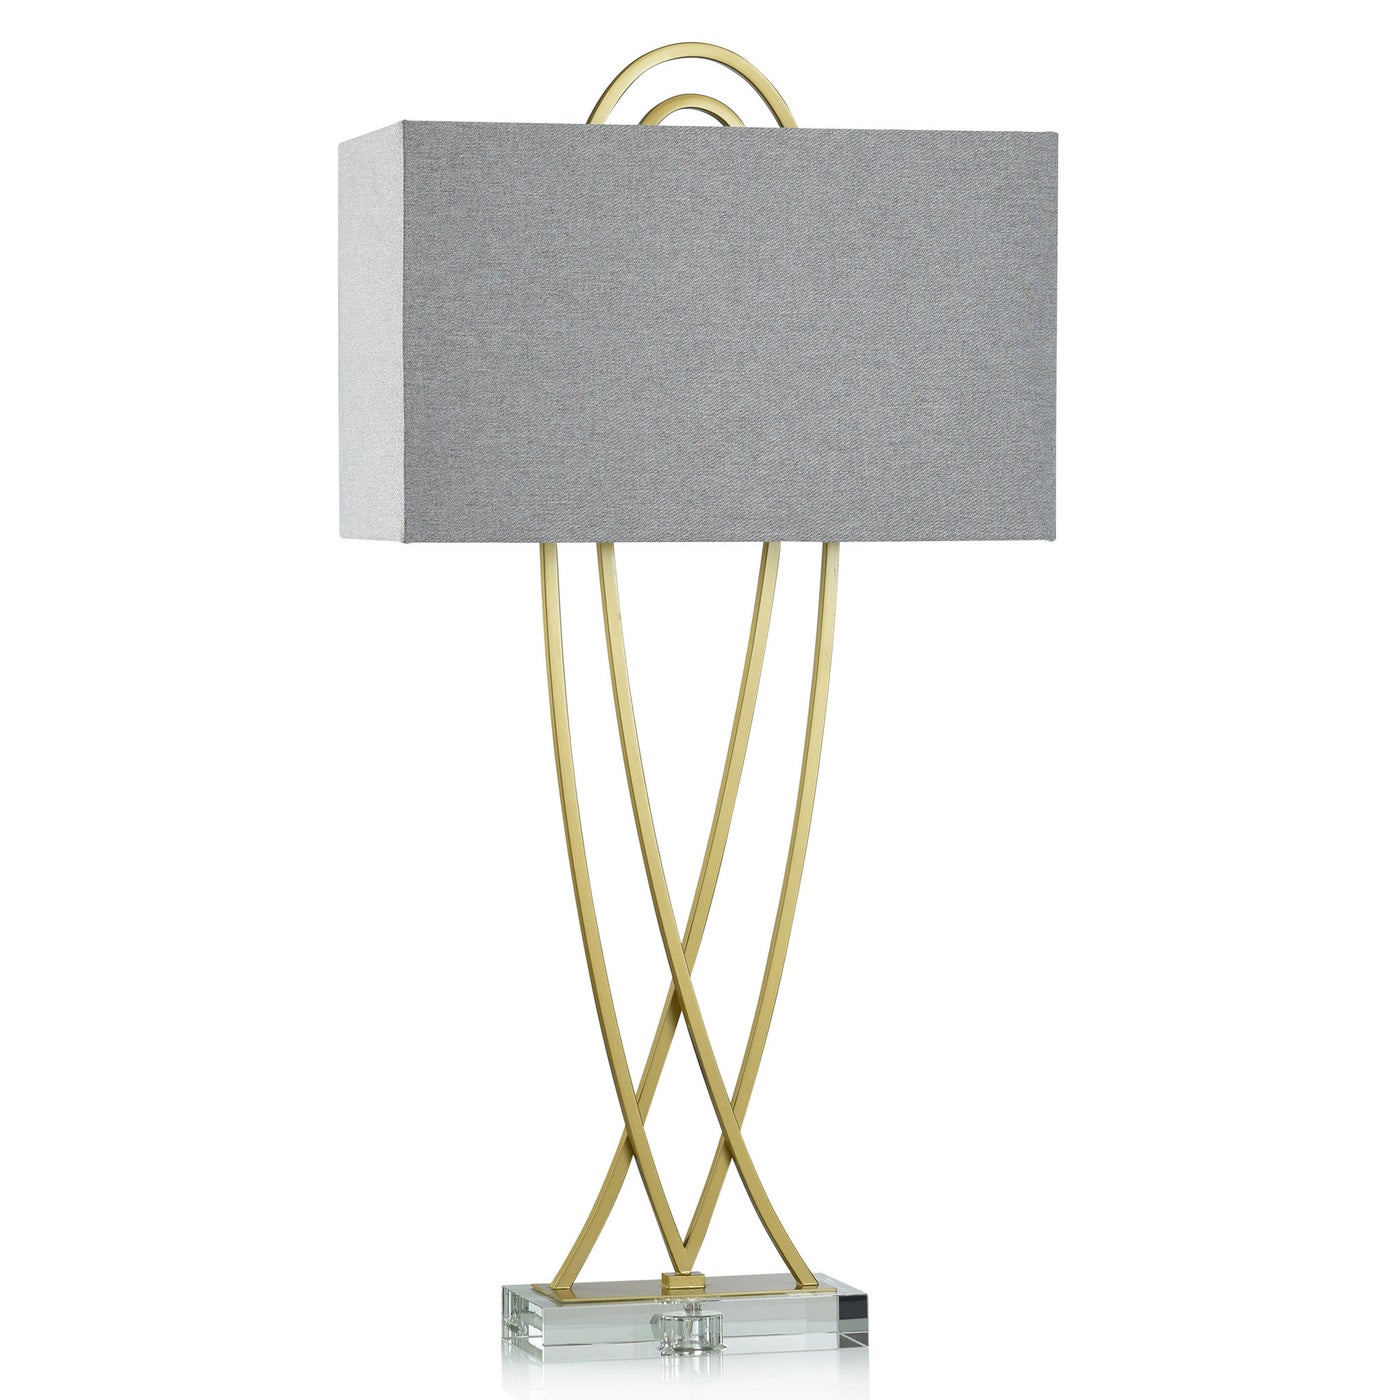 VIDA TABLE LAMP  Brass Finish on Metal with Crystal Base